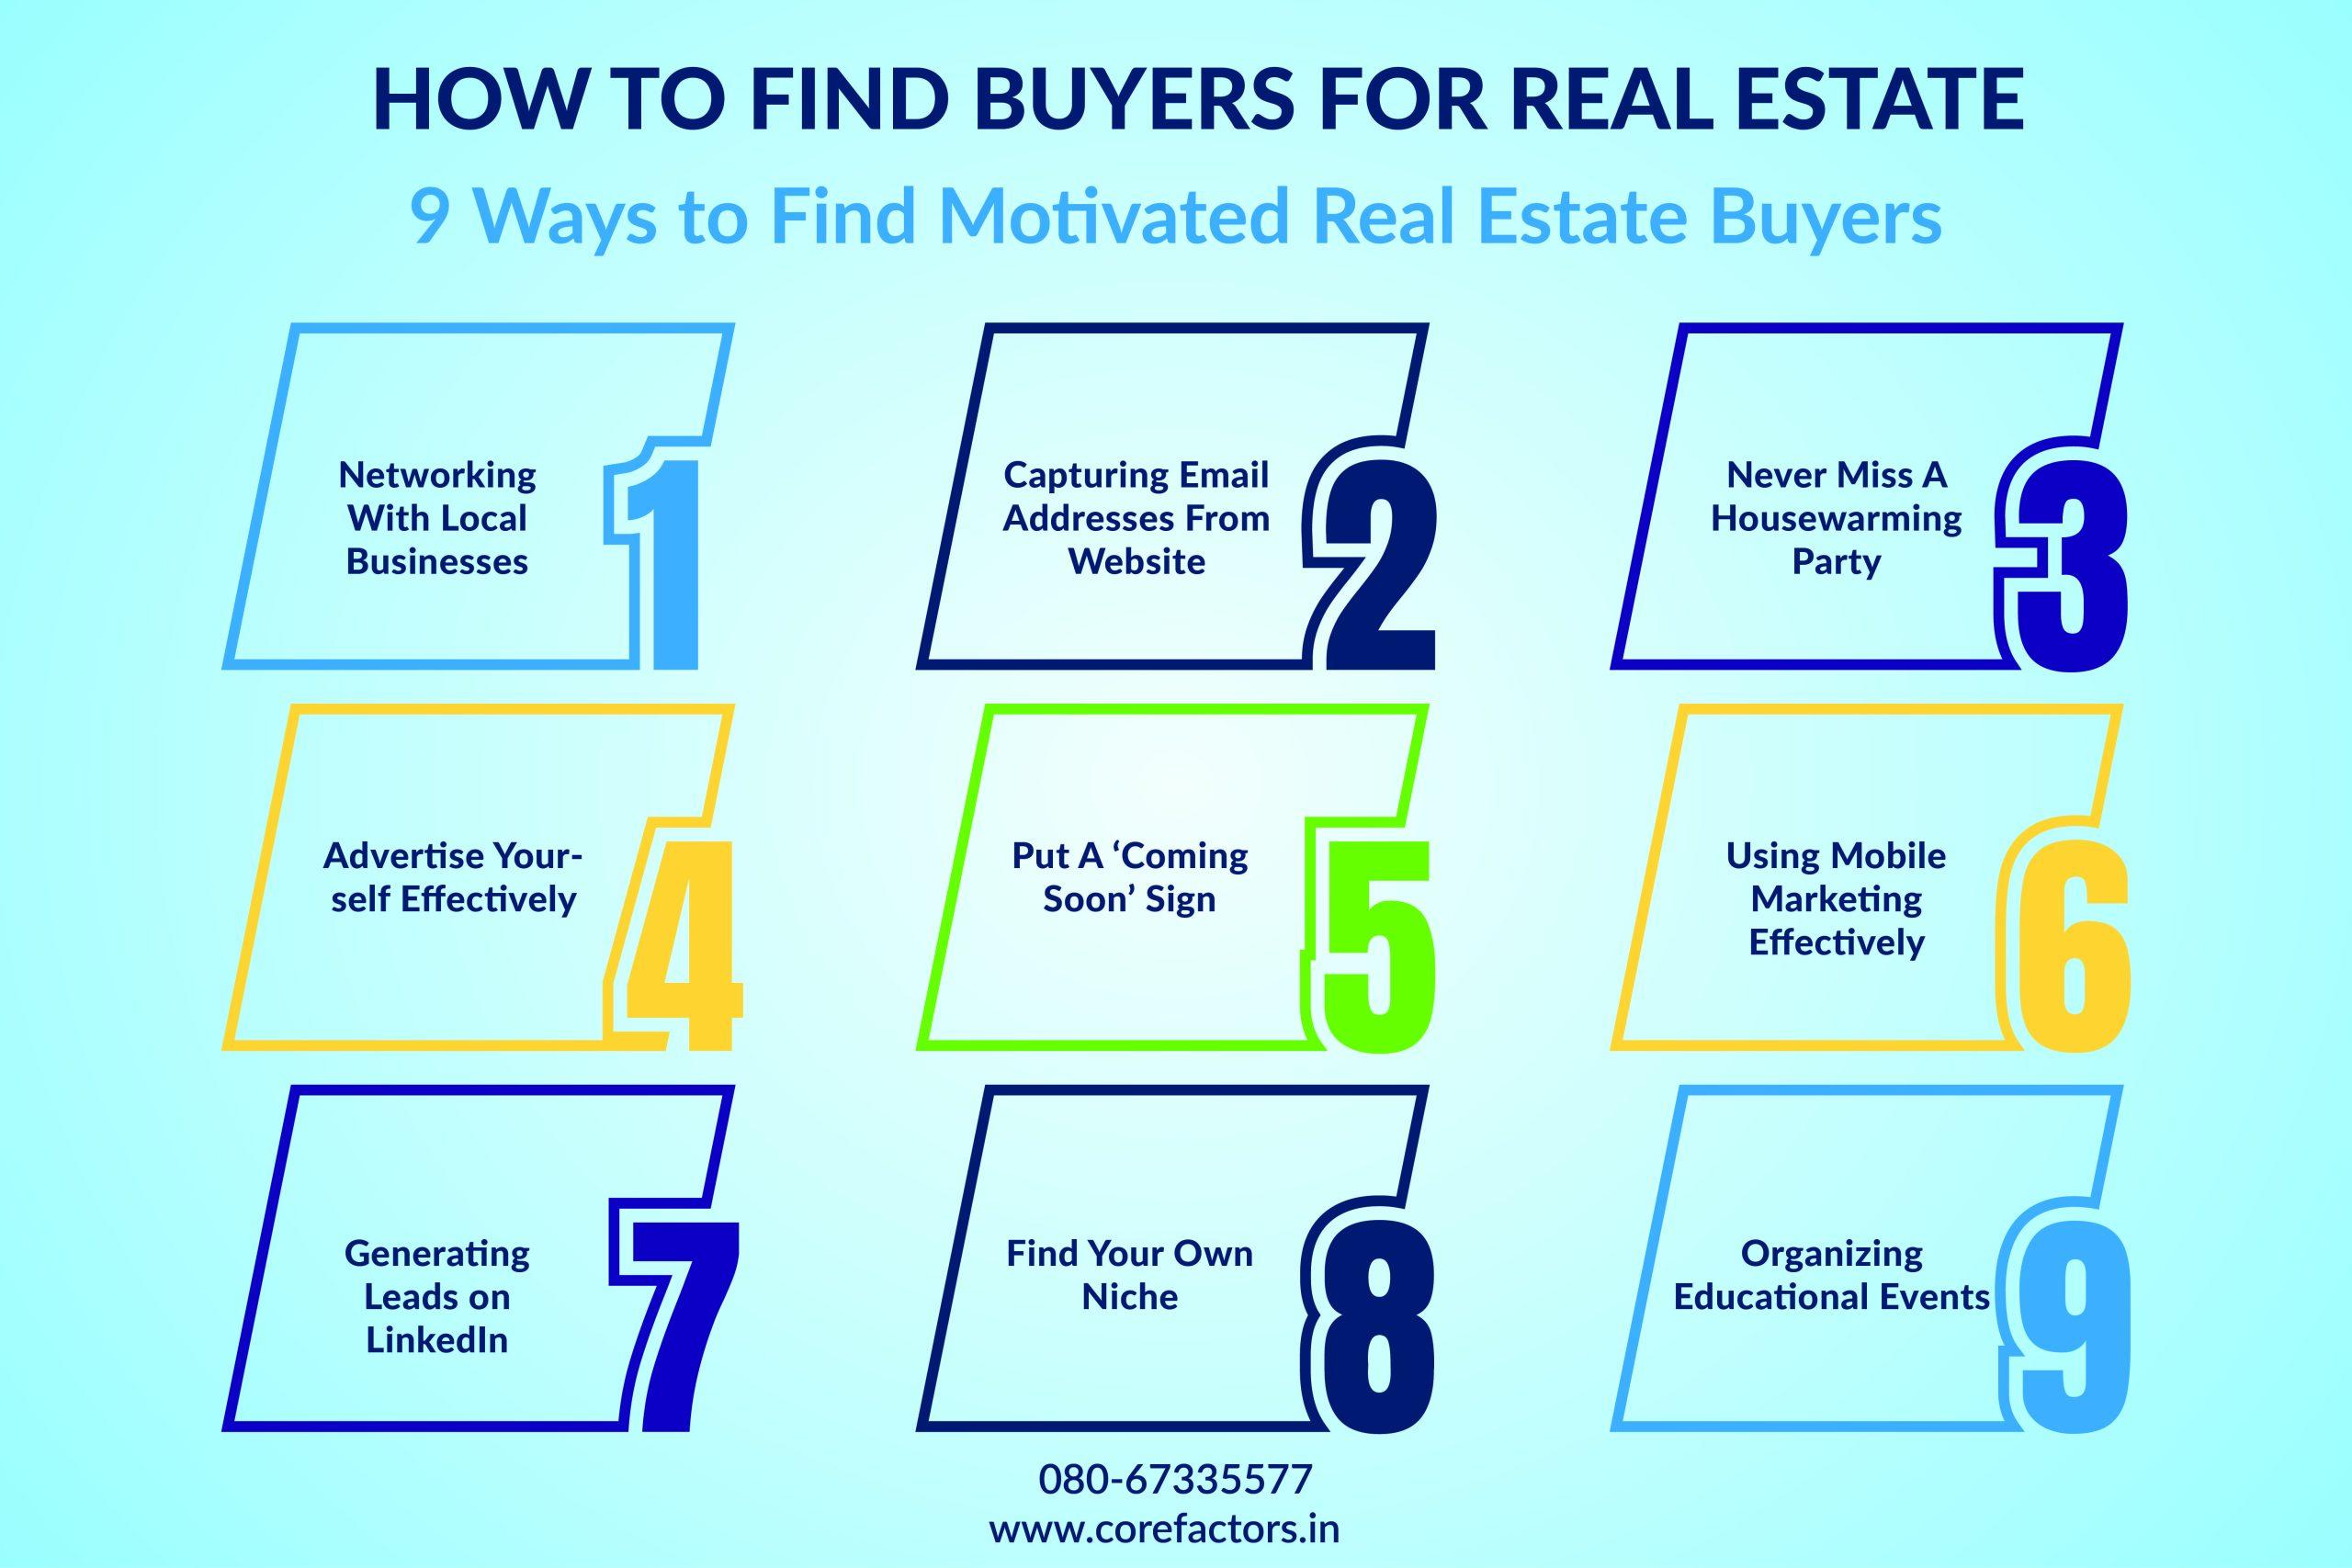 How to find a buyer for your unimproved real estate investment